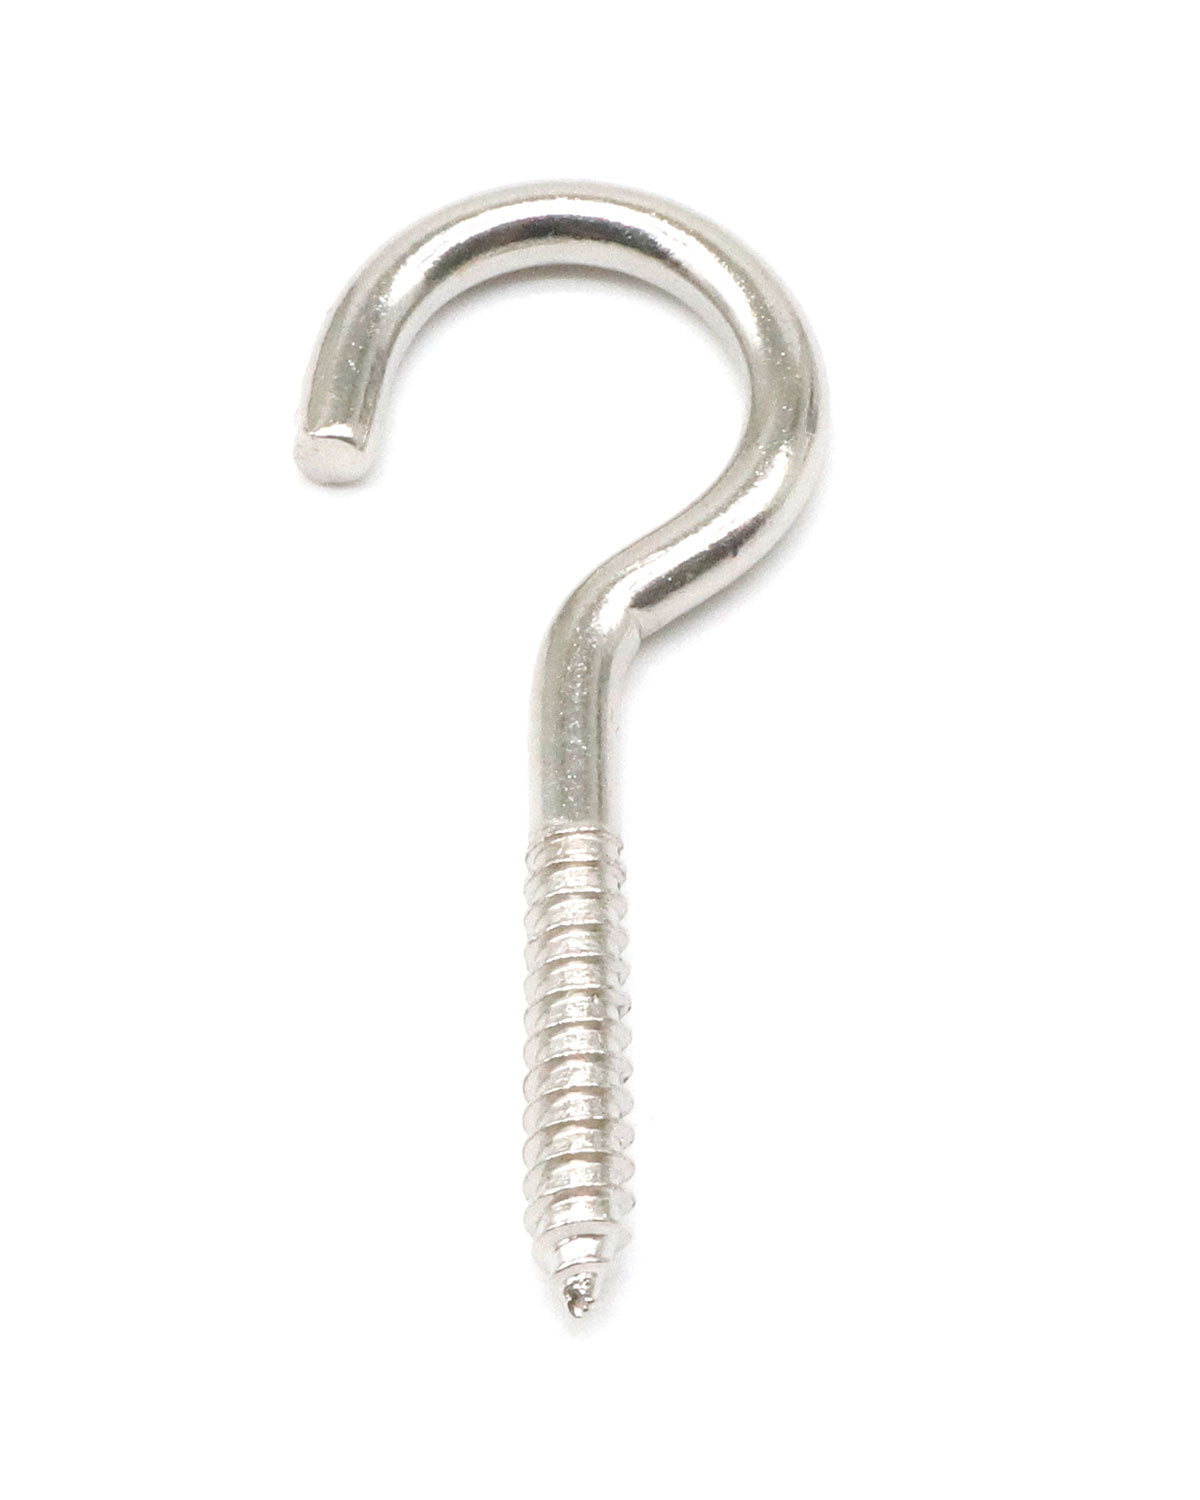 2.5 Inch Heavy Duty Eye Hooks, 10 Pack Stainless Steel Eye Screws, Screw in  Eye Hooks for Wood, Securing Cables Wires, Anti-Rust Self Tapping Eyelet